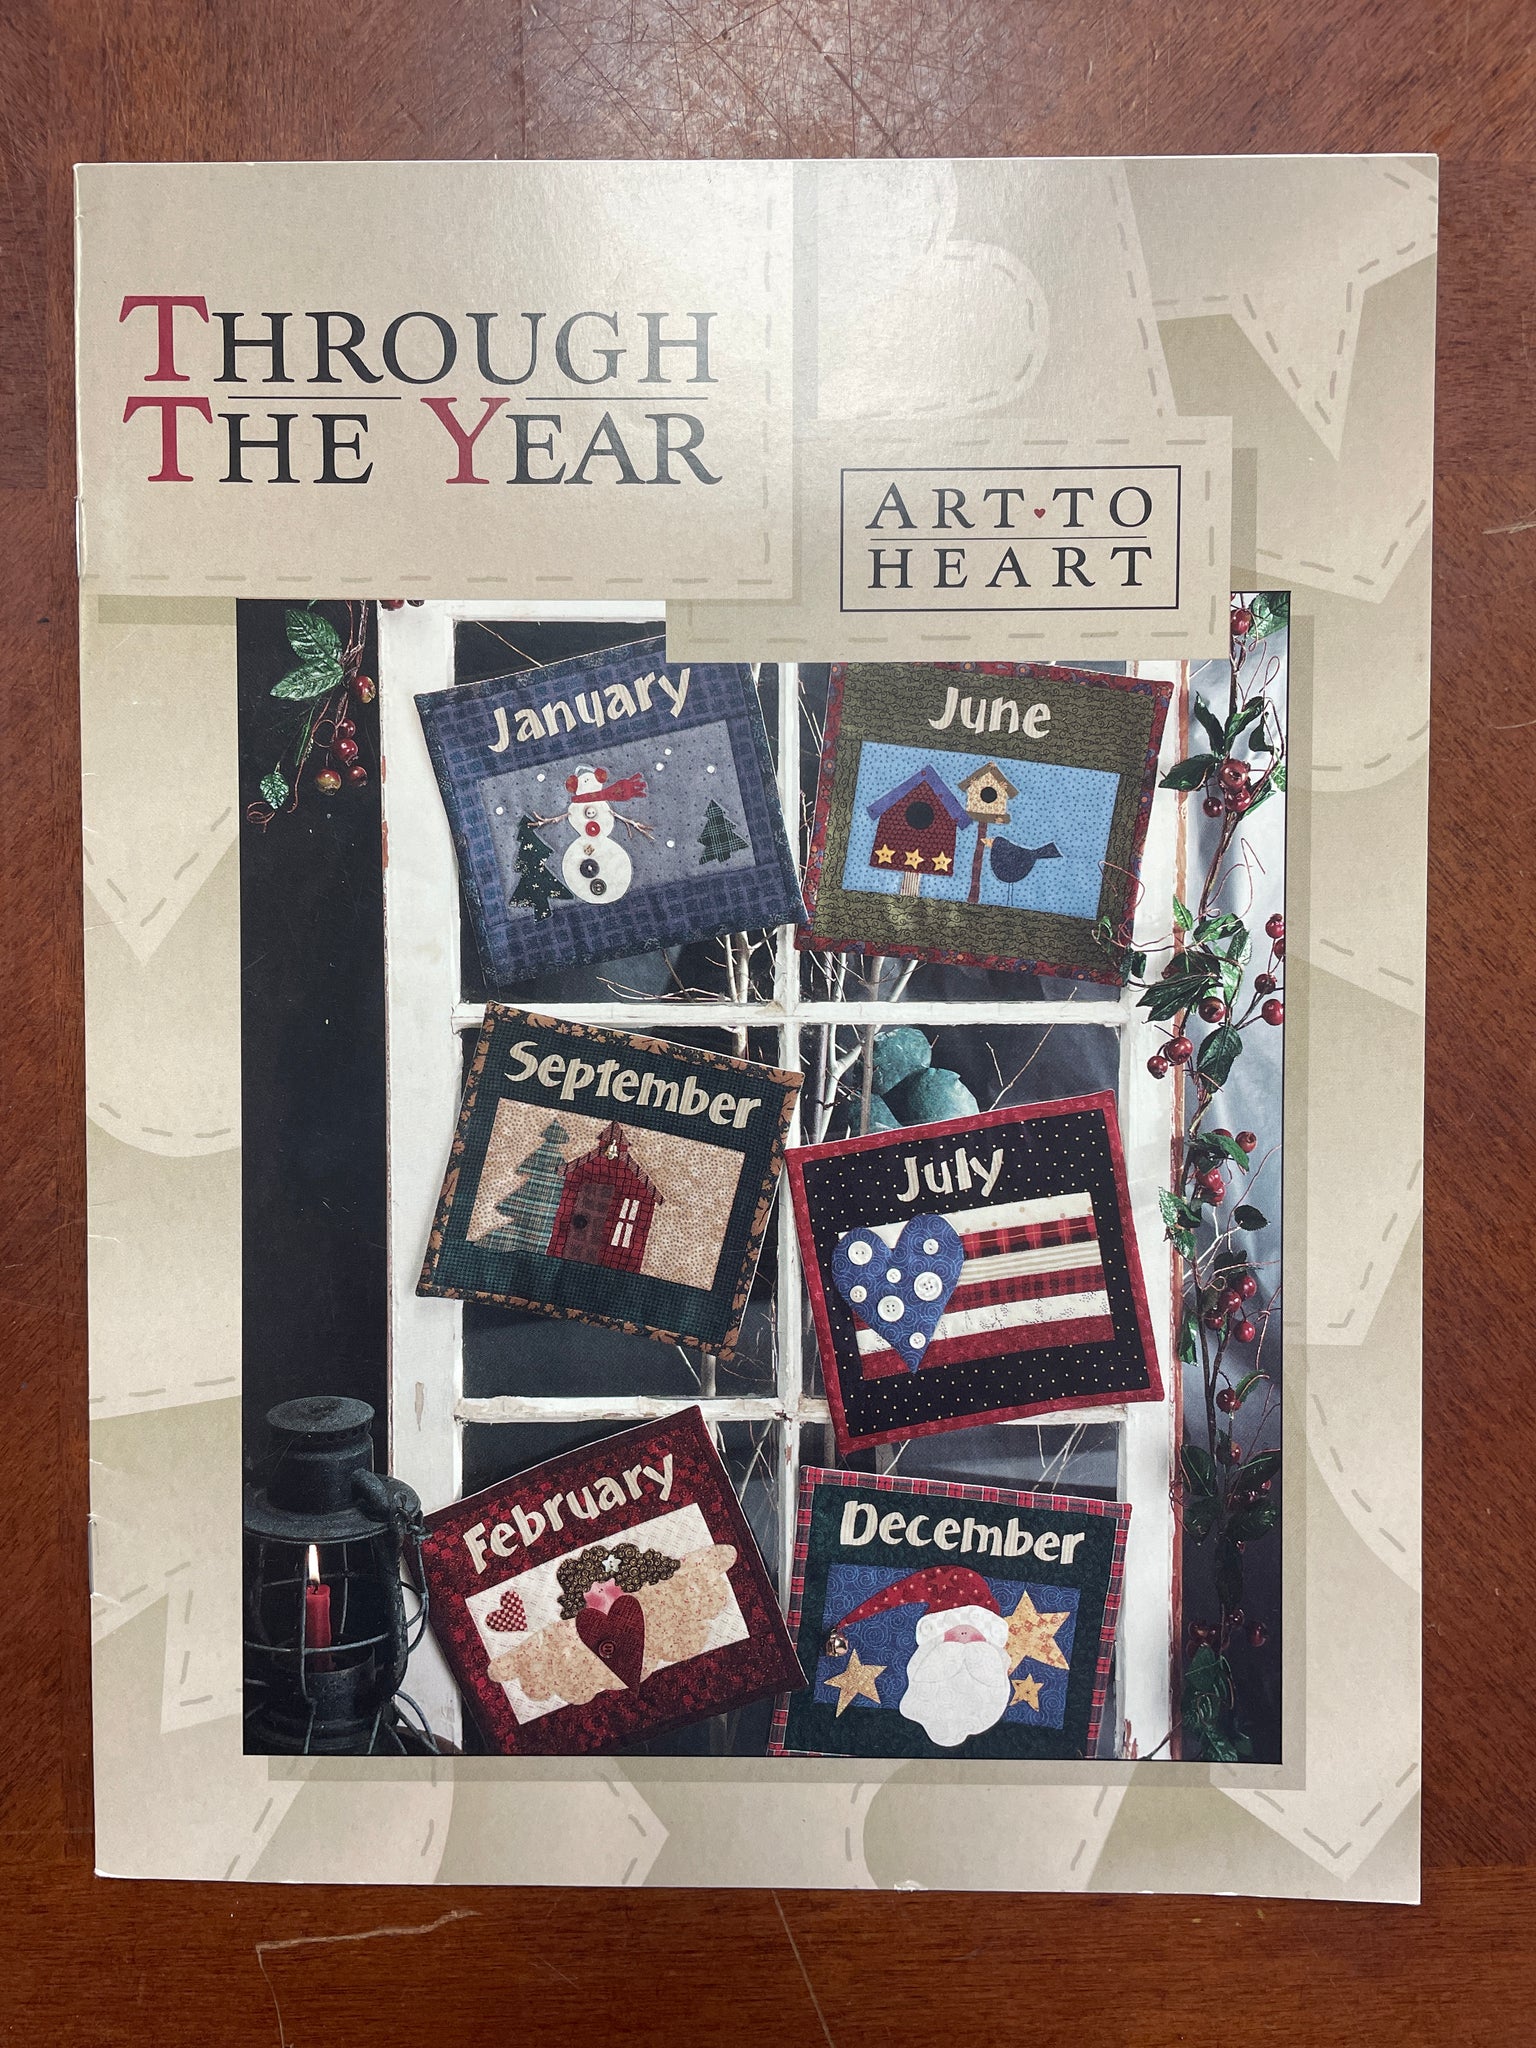 1996 Quilted Appliqué Pattern Book - "Through the Year"